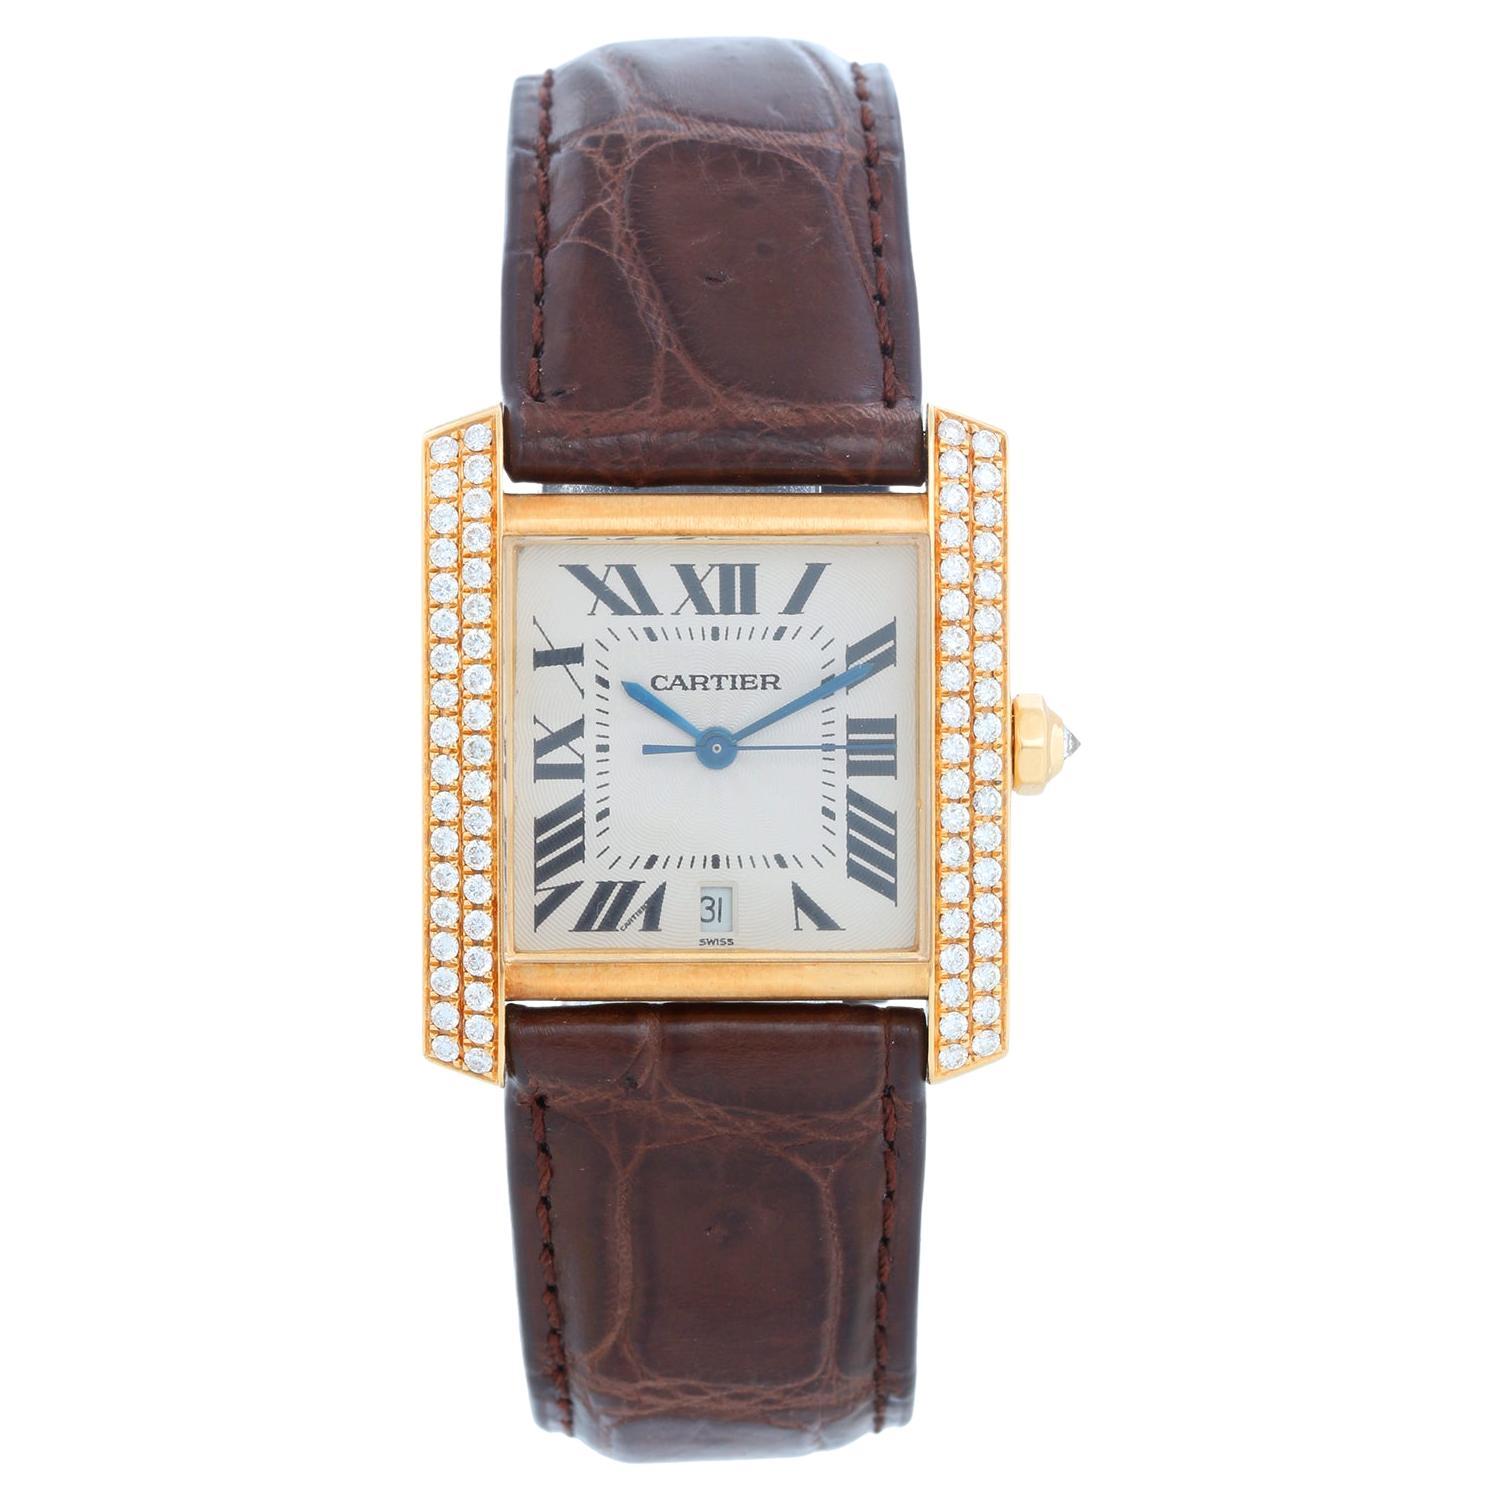 Cartier Tank Francaise 18k Yellow Gold Men's Watch WE1010R8 1840 For Sale